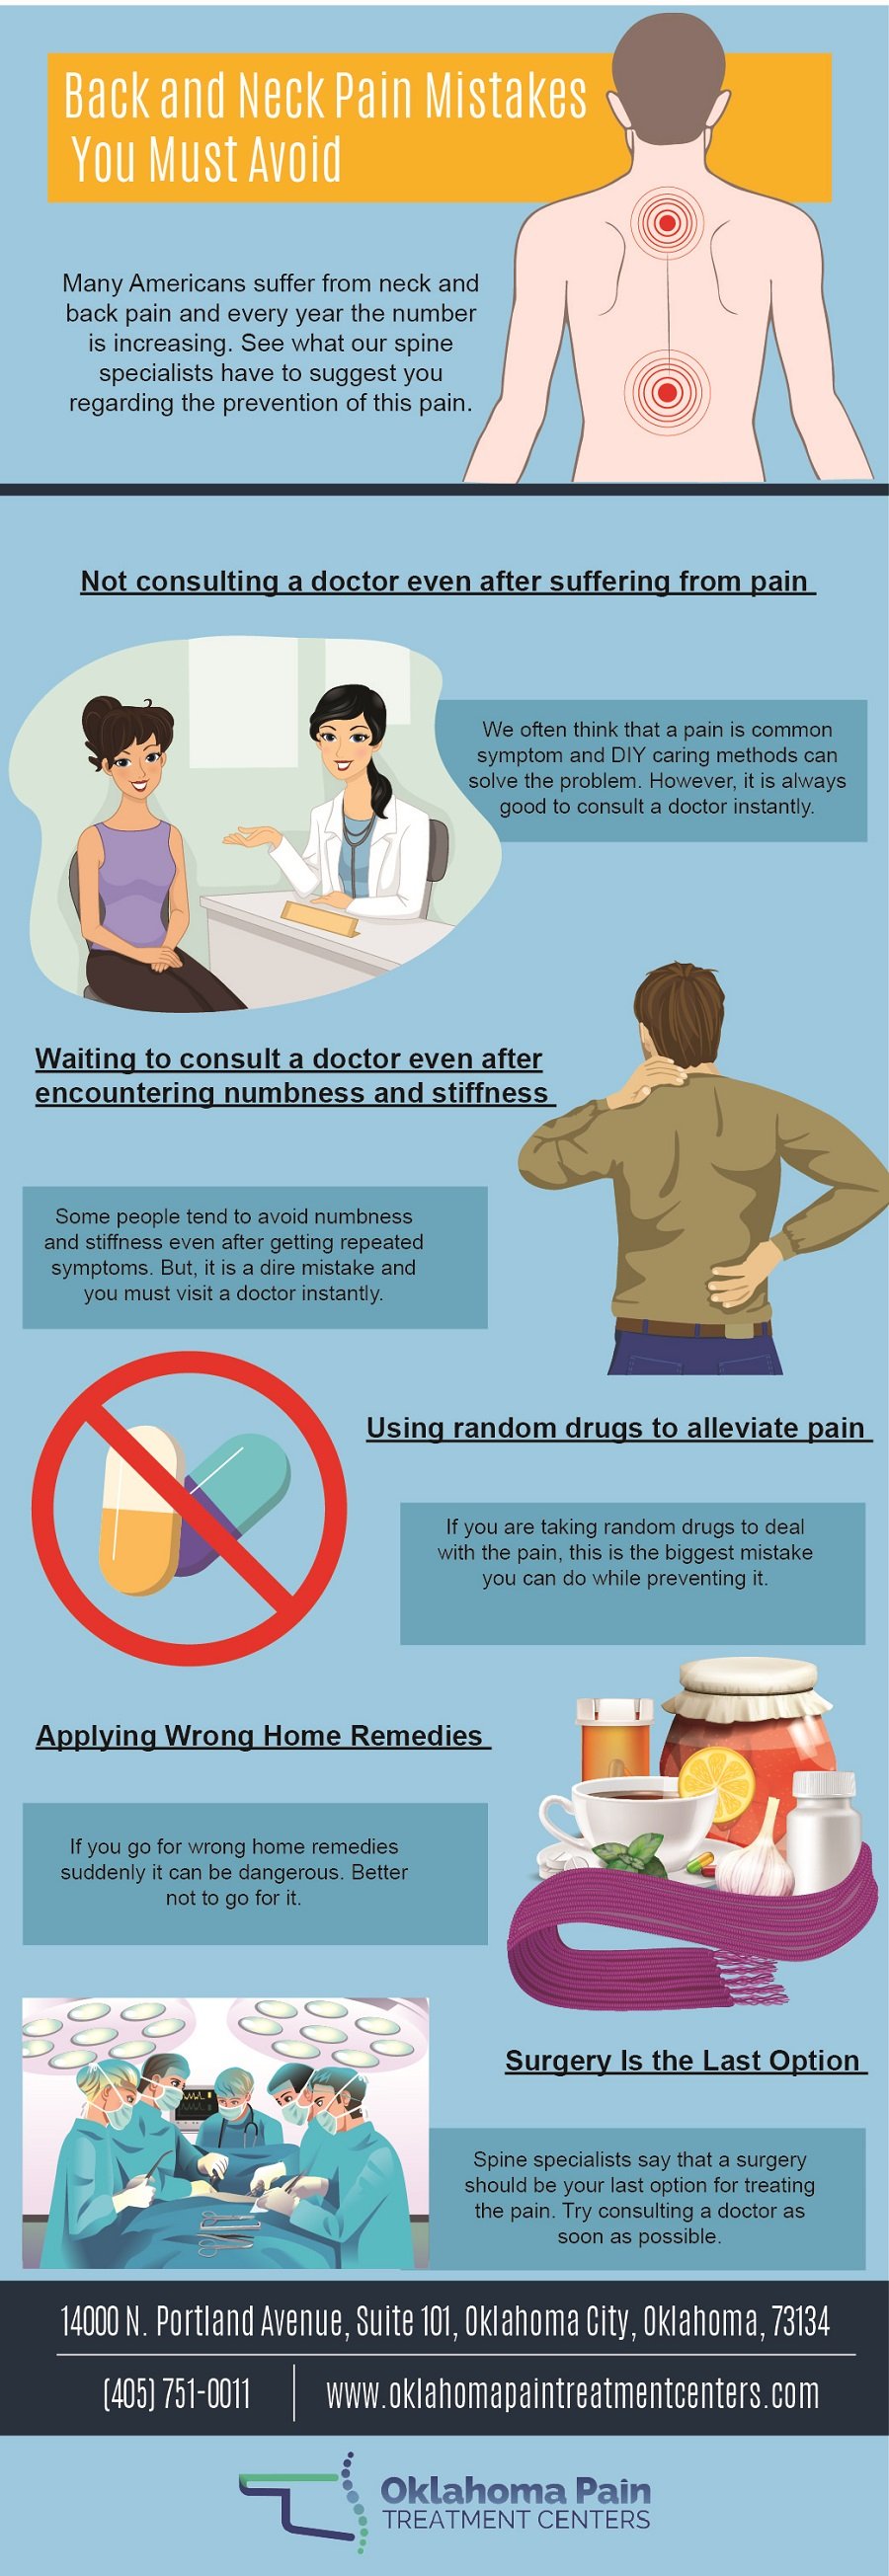 Back And Neck Pain Mistakes You Must Avoid (Infographic)